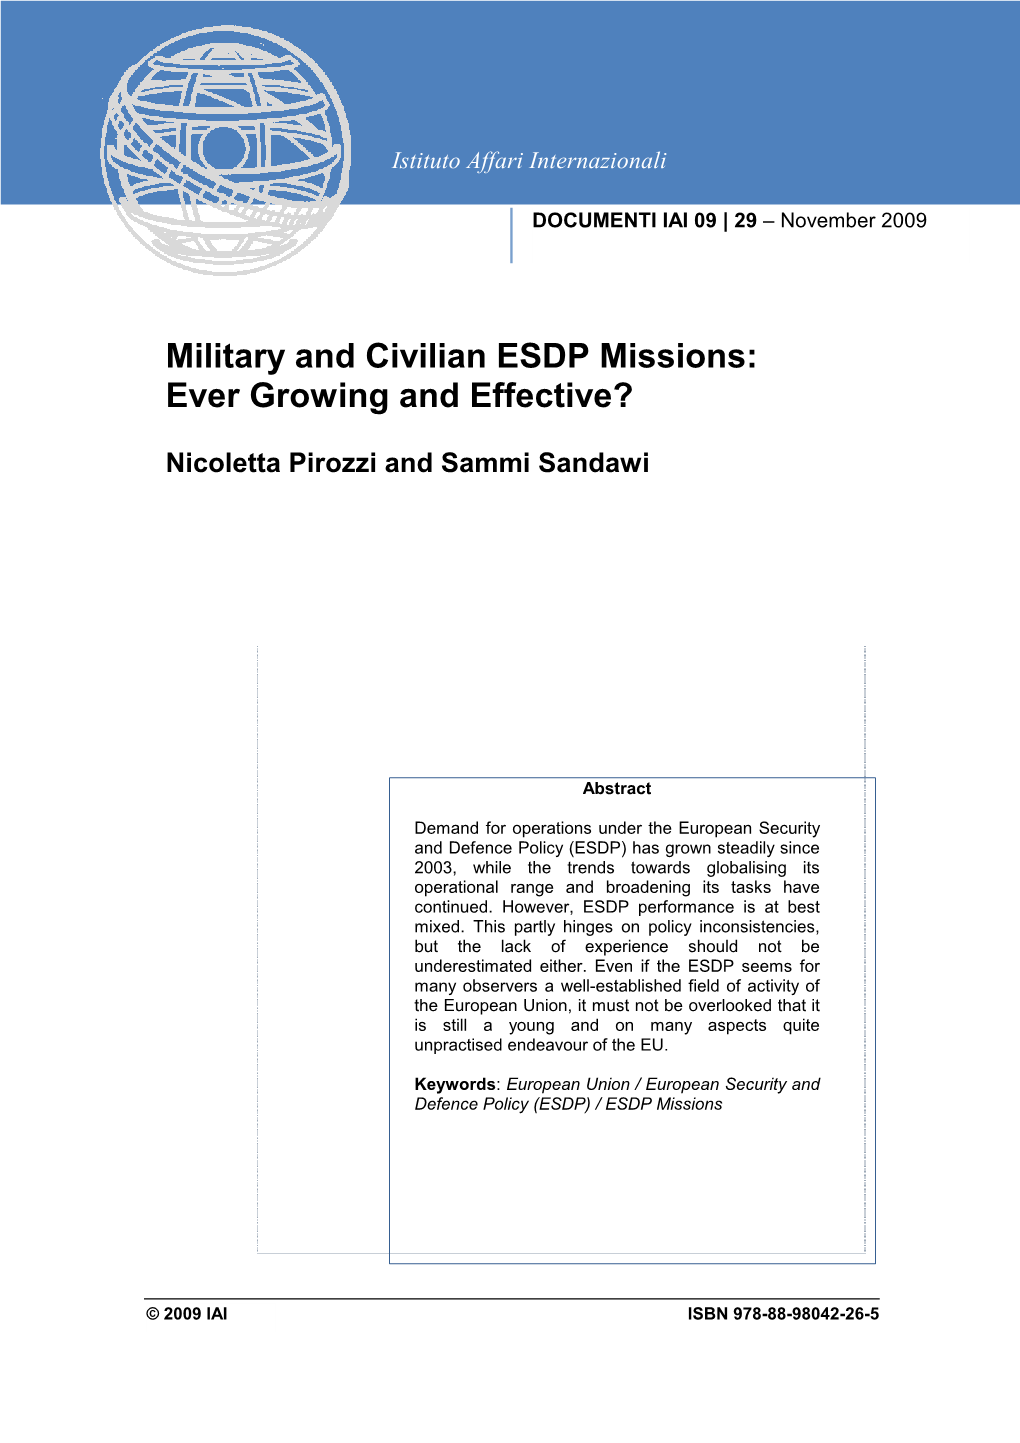 Military and Civilian ESDP Missions: Ever Growing and Effective?